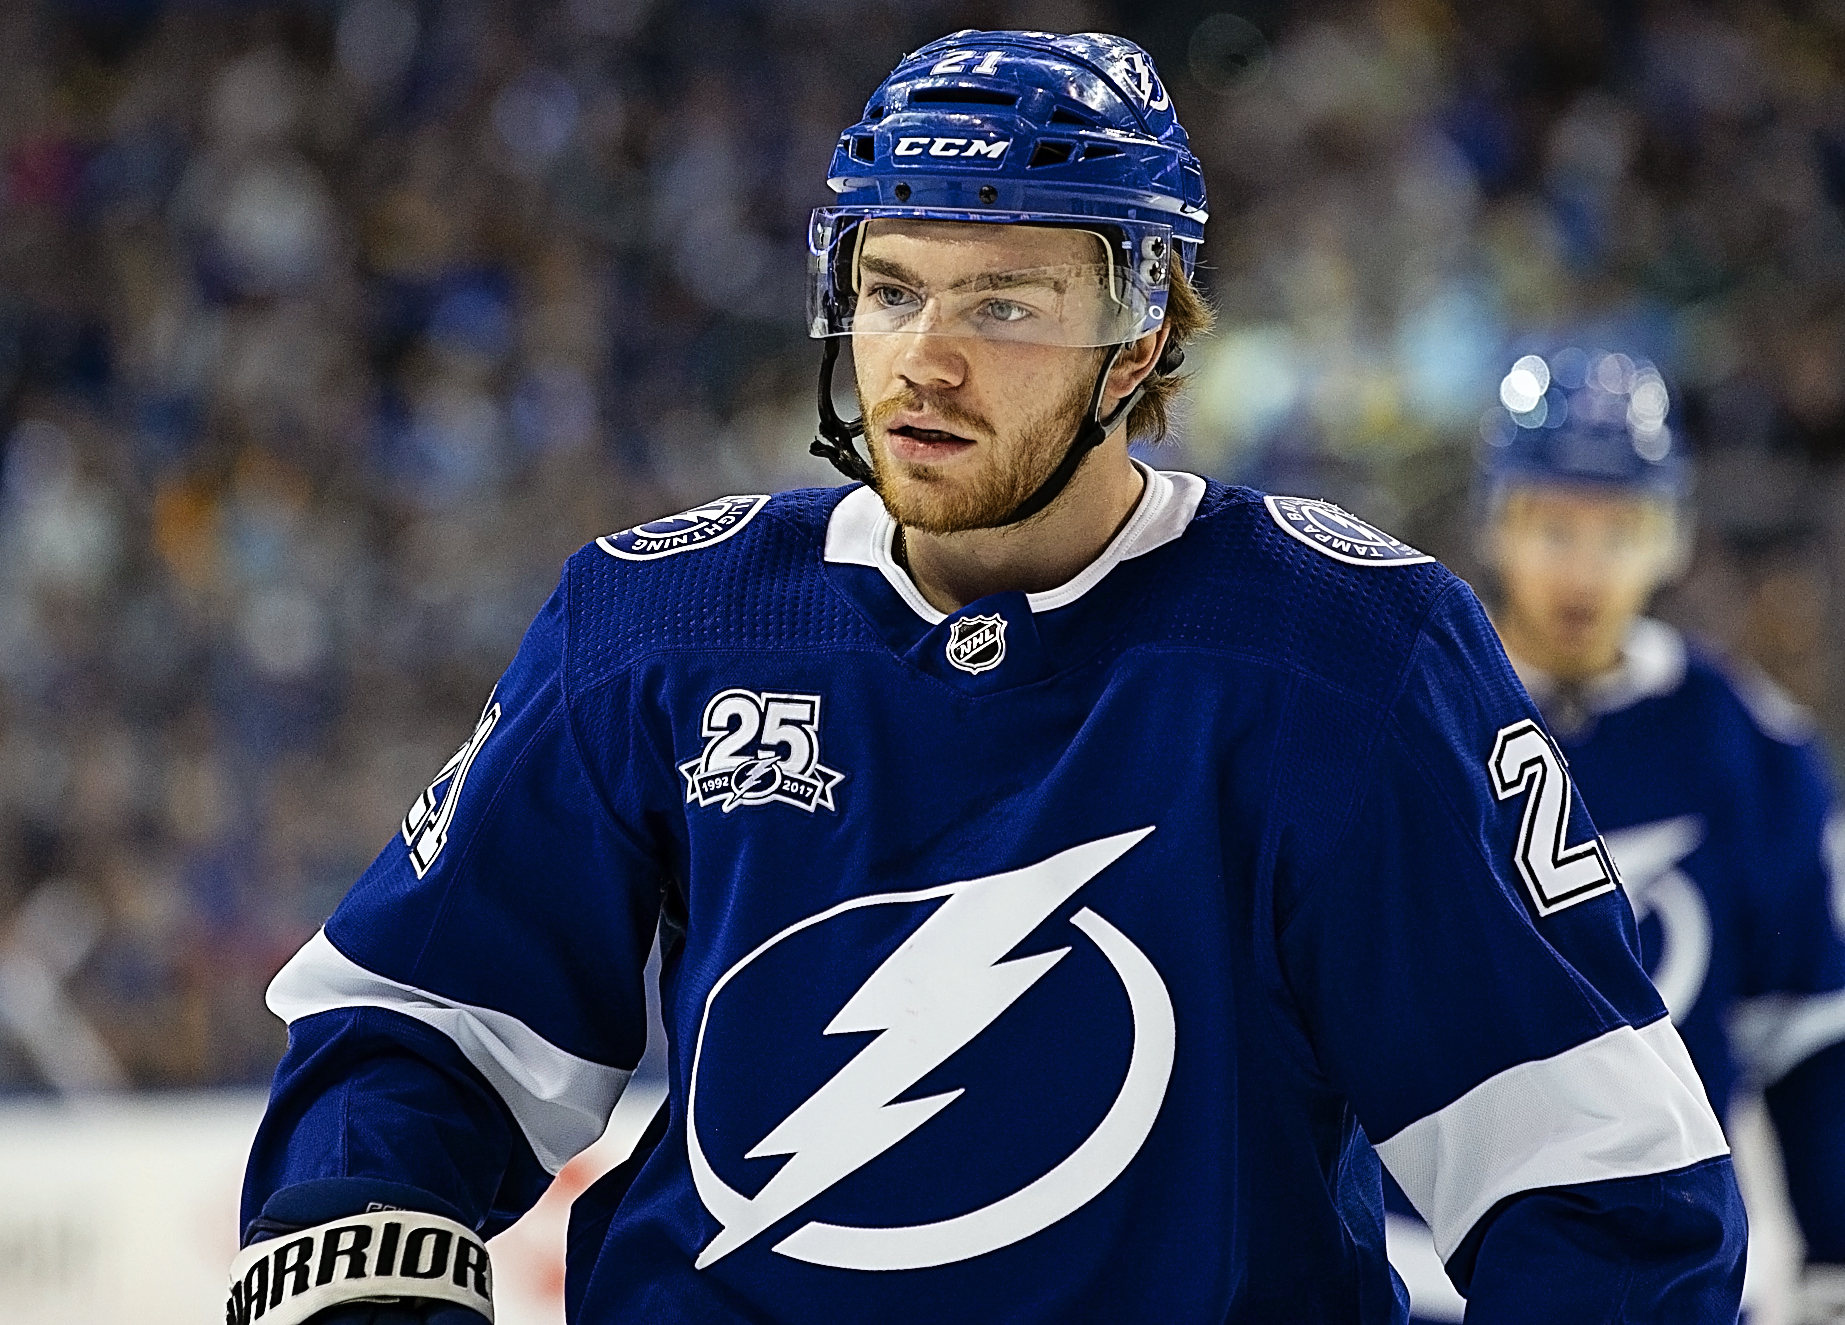 Brayden Point bounced back with a goal and three assists./CARMEN MANDATO